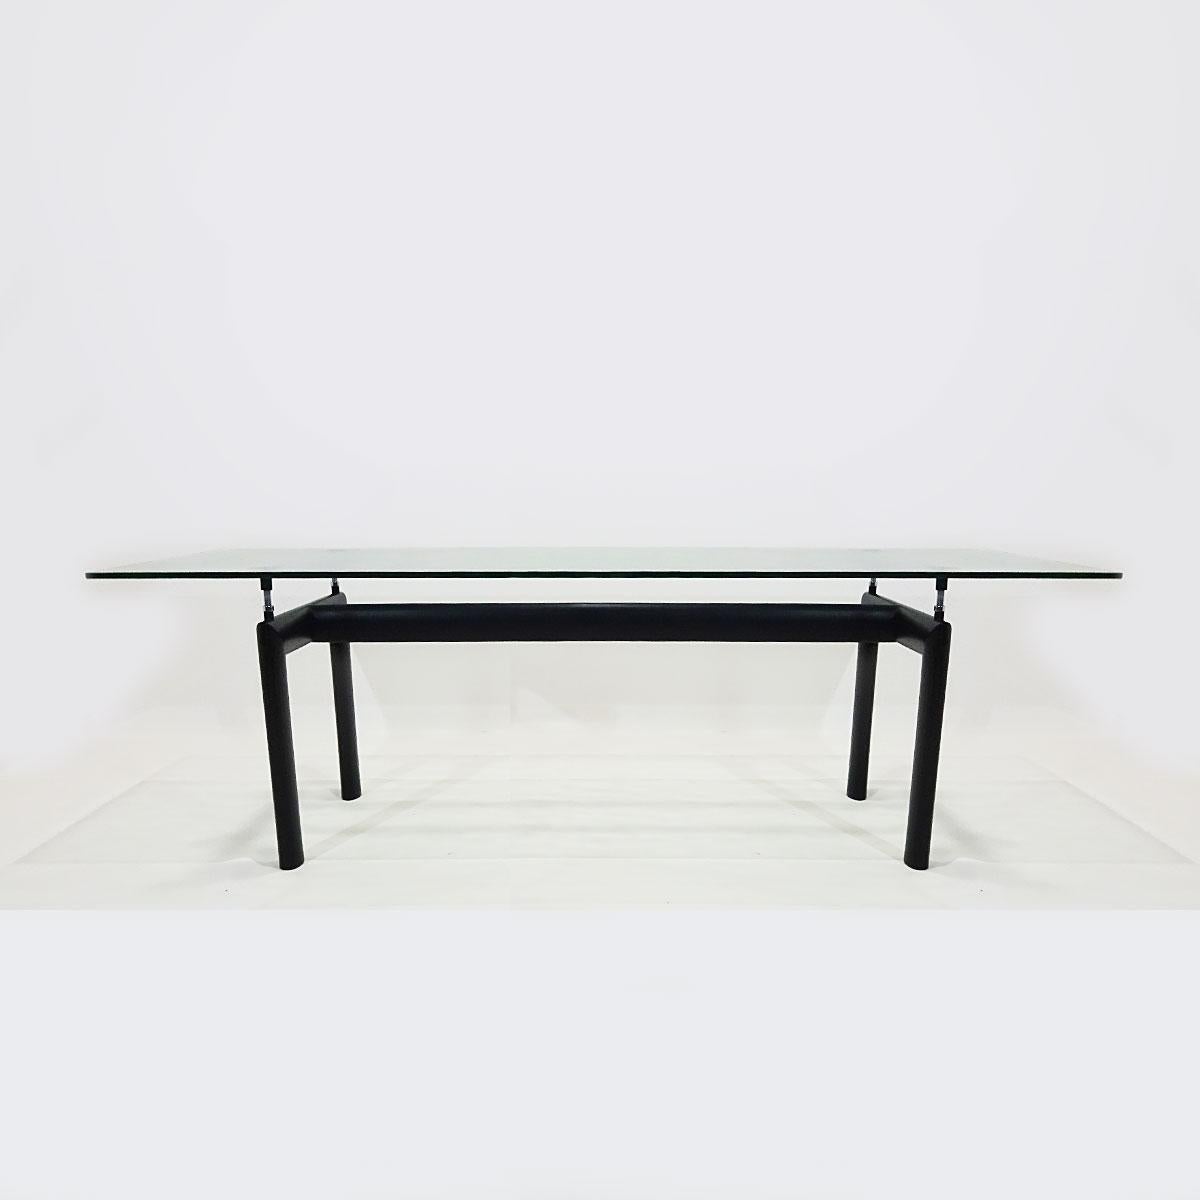 An original 6-8 seat black metal and textured glass vintage Cassina LC6 table originally designed in 1928 by Le Corbusier, Pierre Jeanneret and Charlotte Perriand.

Born in Switzerland in 1887 Charles-Édouard Jeanneret, known as Le Corbusier, is